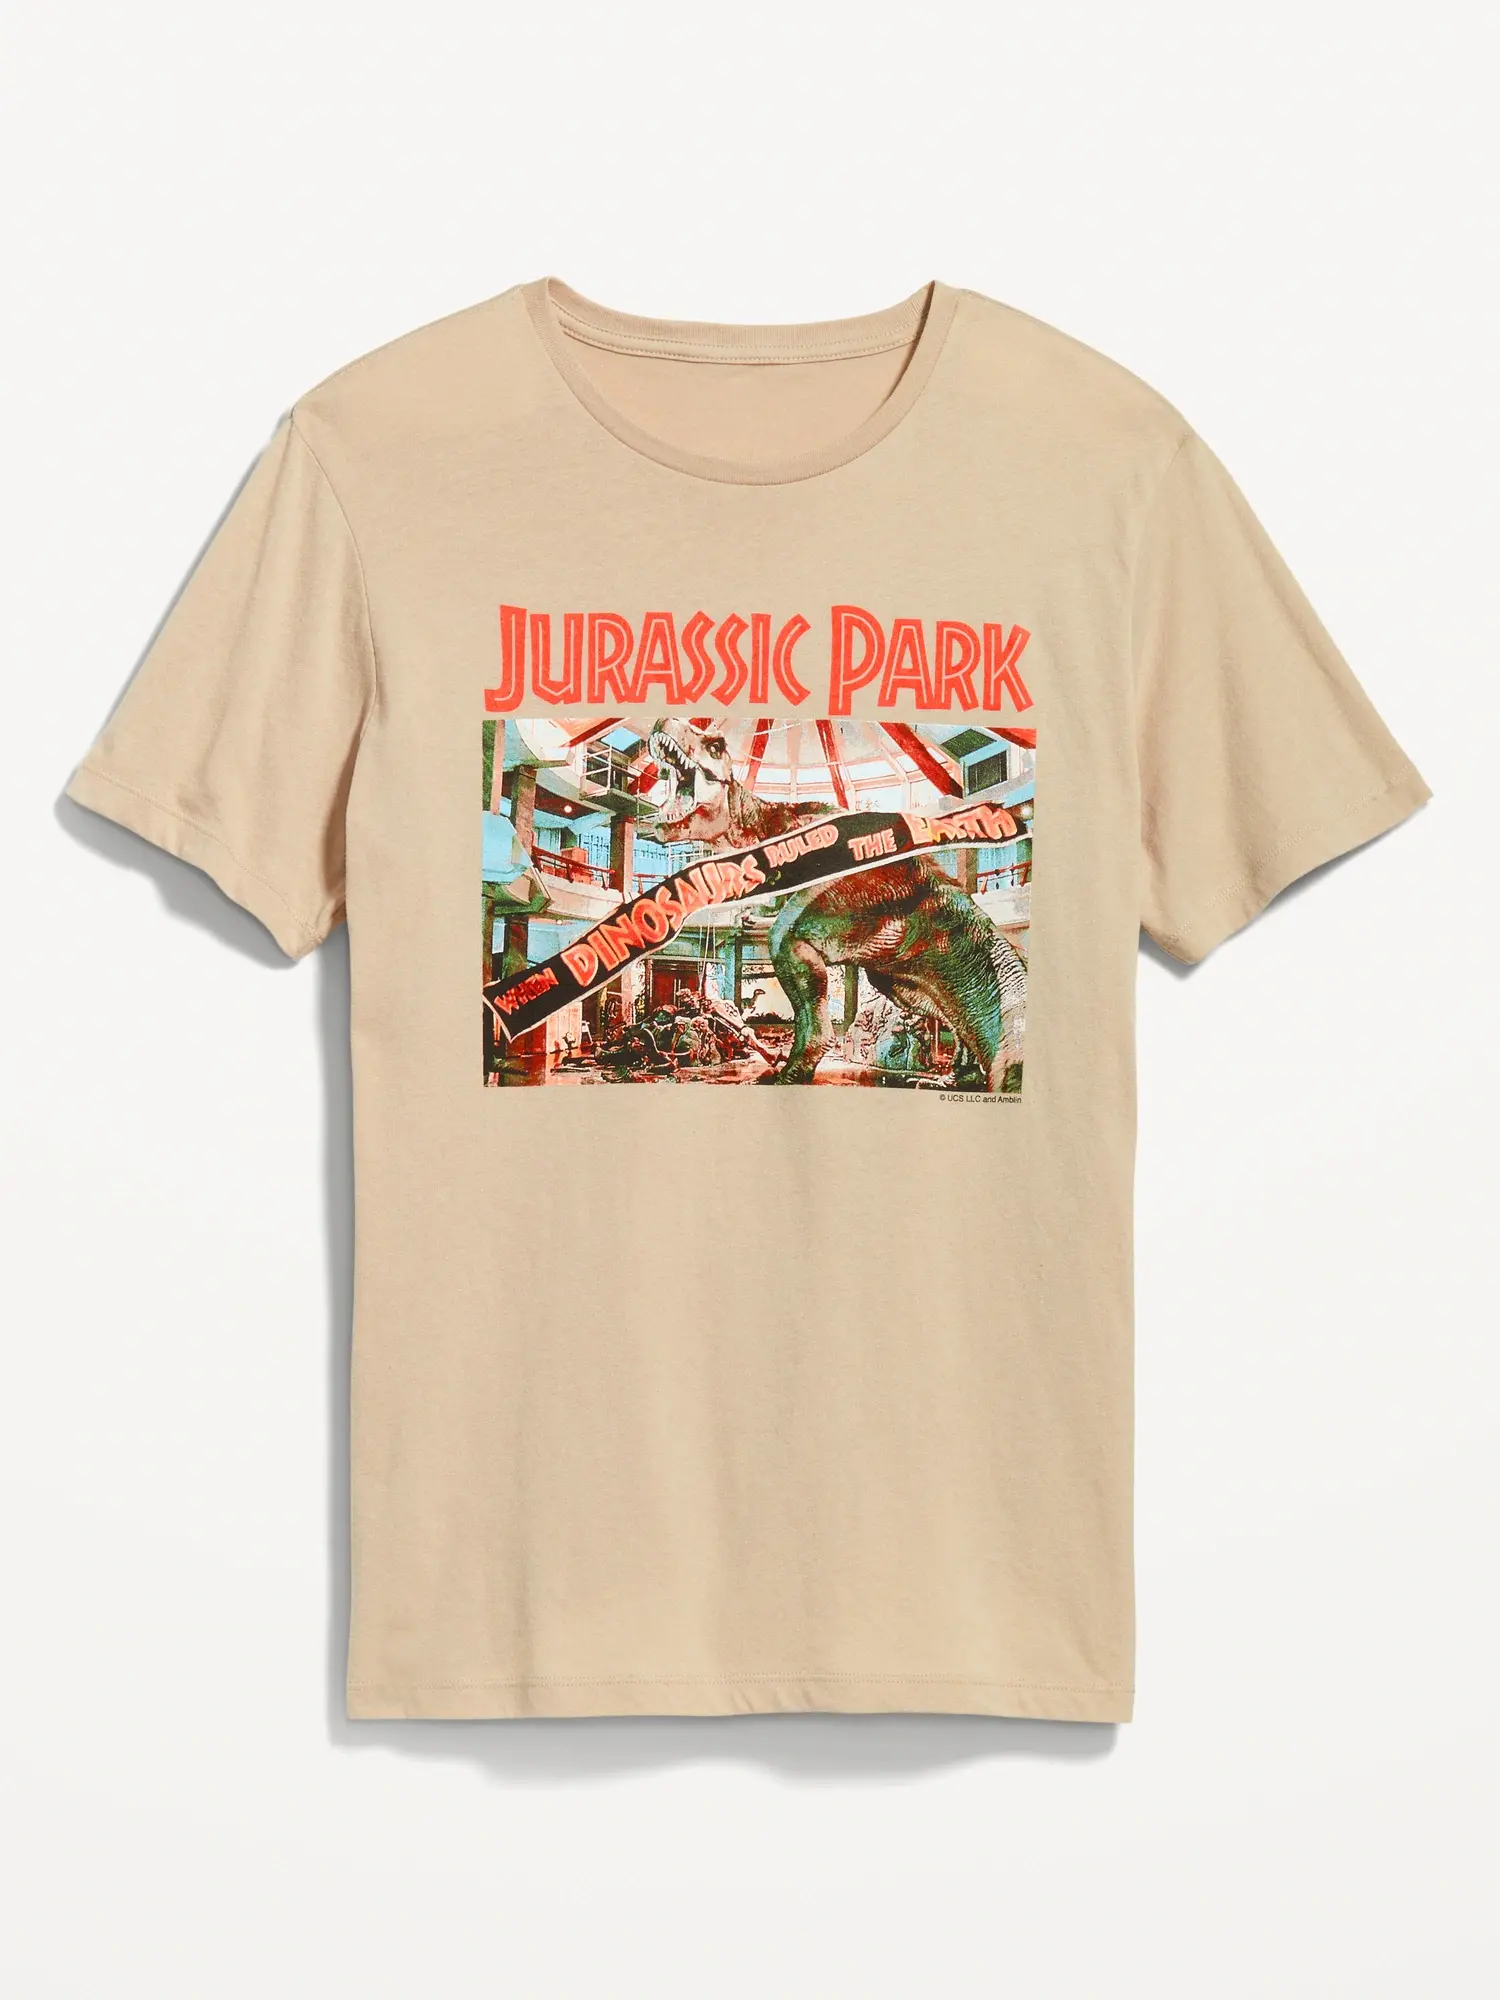 Old Navy Jurassic Park™ Gender-Neutral T-Shirt for Adults brown. 1